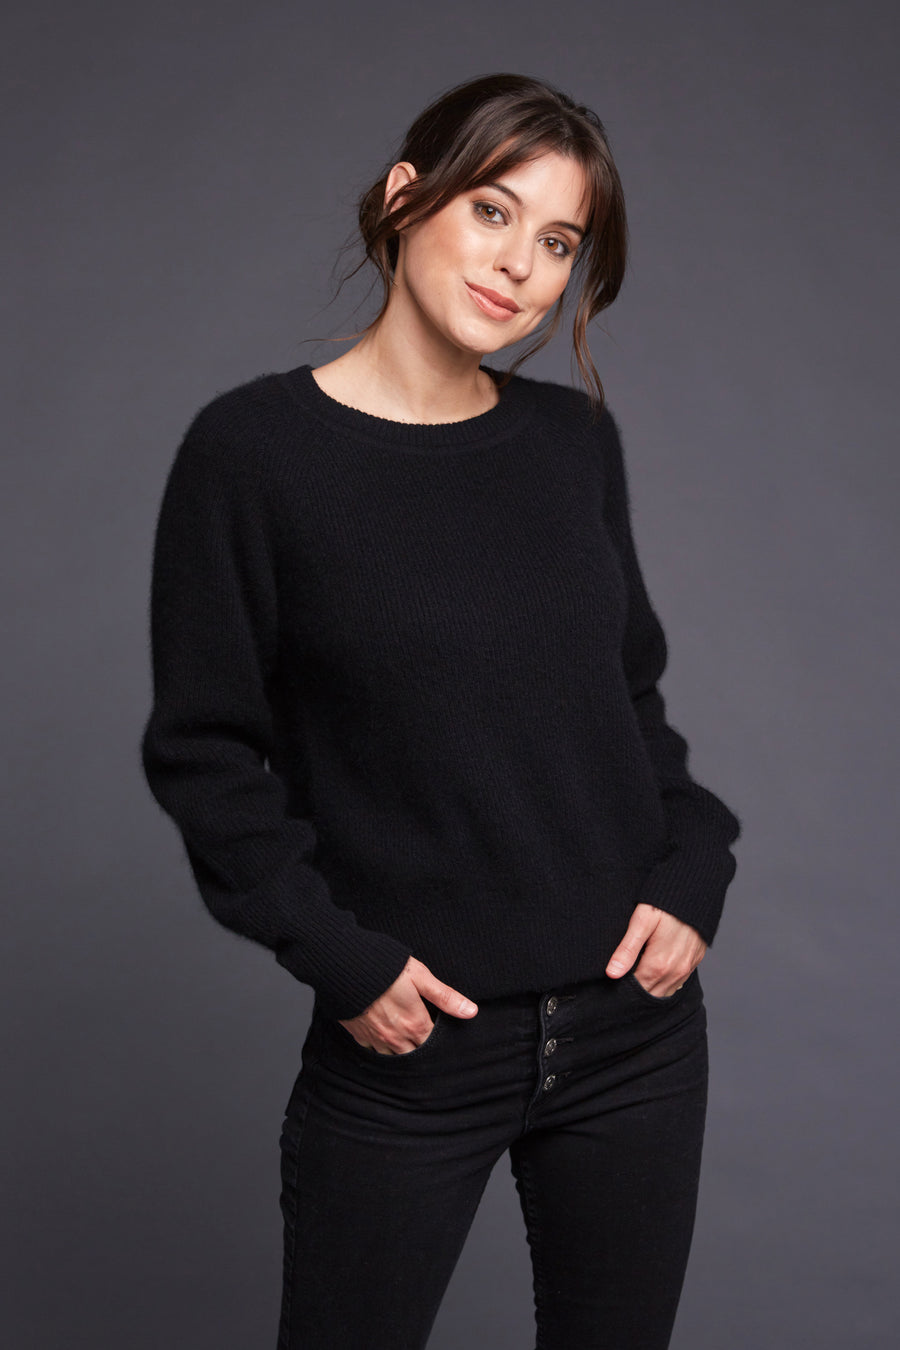 pine cashmere betsy trendy women's 100% pure cashmere crewneck sweater in black